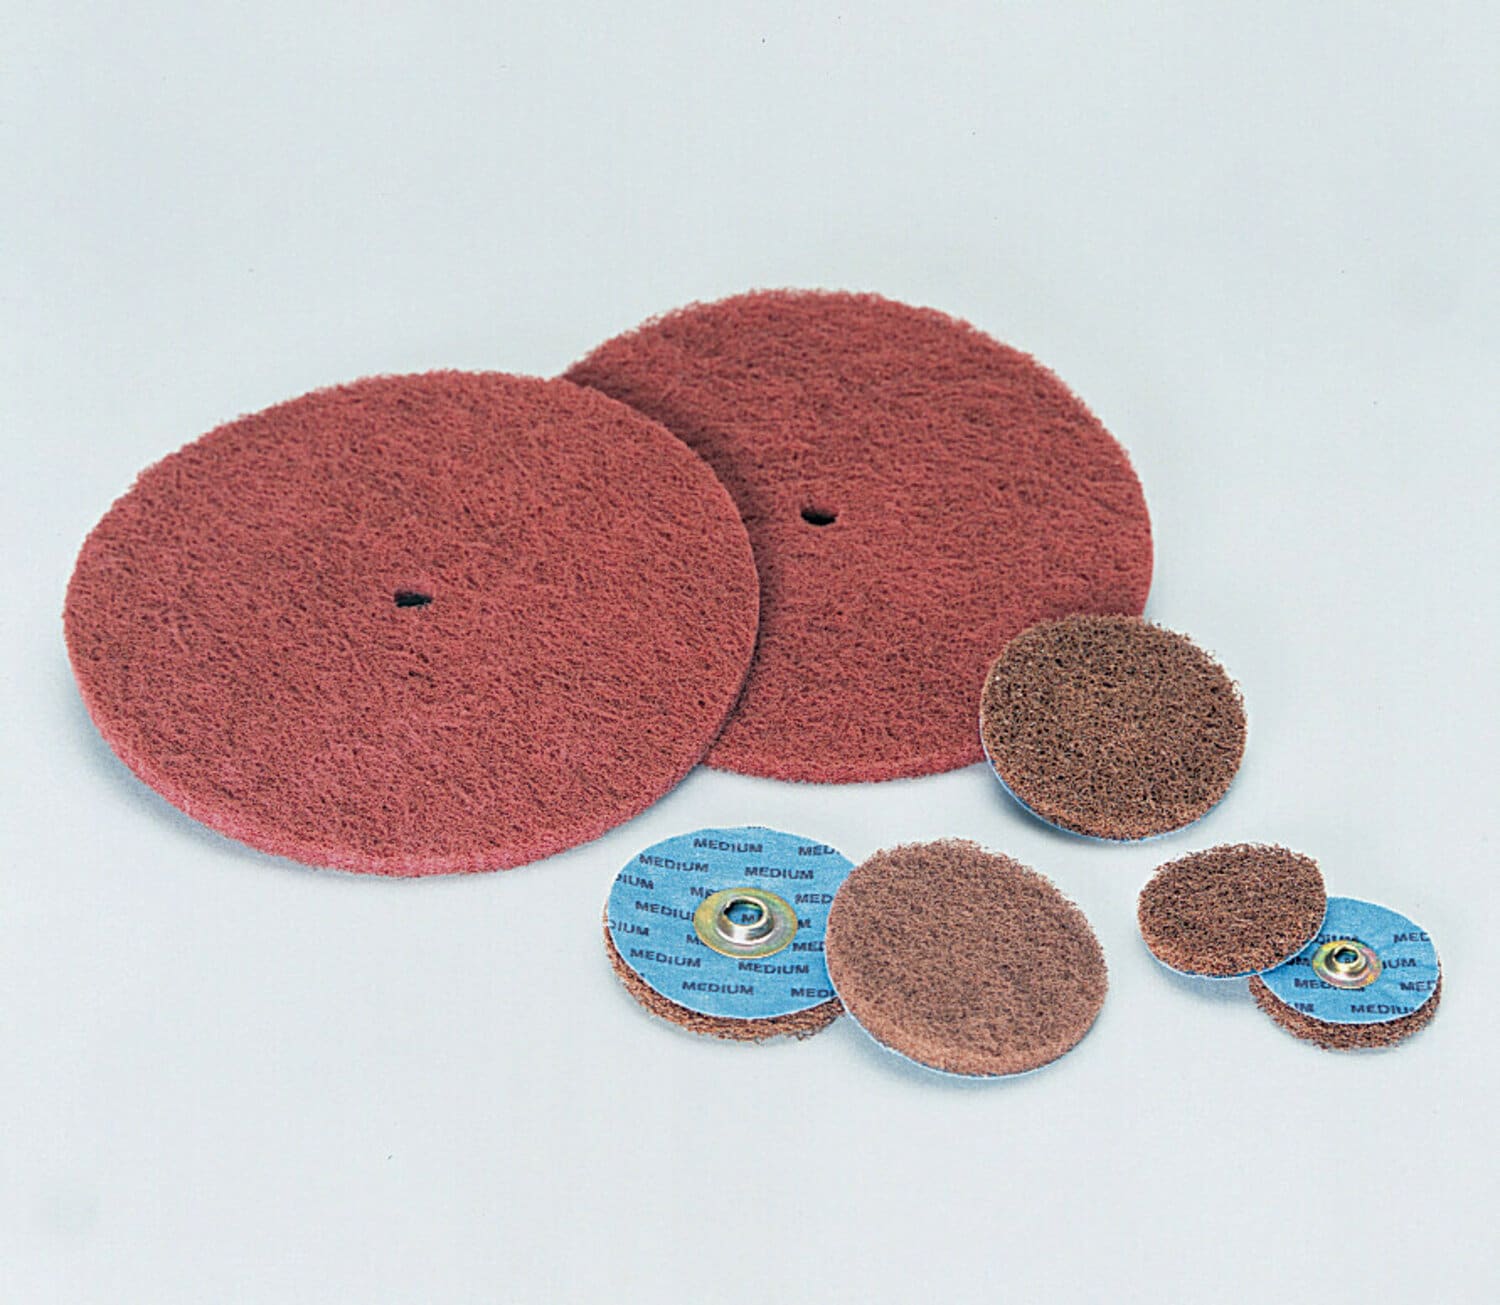 7000047089 - Standard Abrasives Buff and Blend Hook and Loop GP Vacuum Disc, 831720,
6 in A MED 8 Holes, 10/Pac, 100 ea/Case